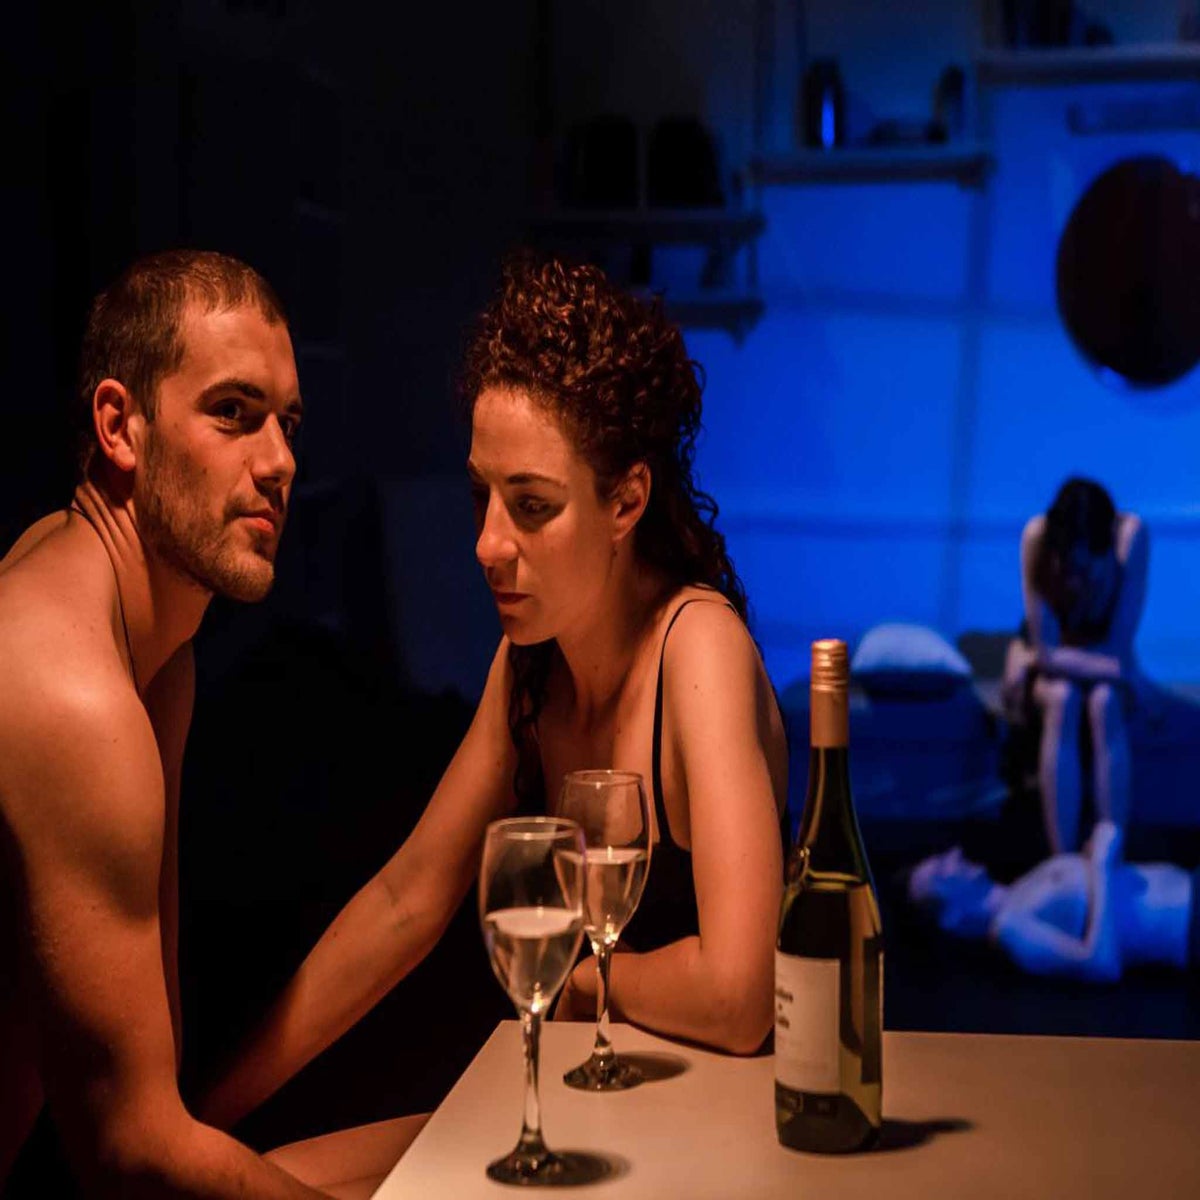 Sarah Davenport Naked - Sex scenes in theatre: Why are we so prudish about making love on stage? |  The Independent | The Independent